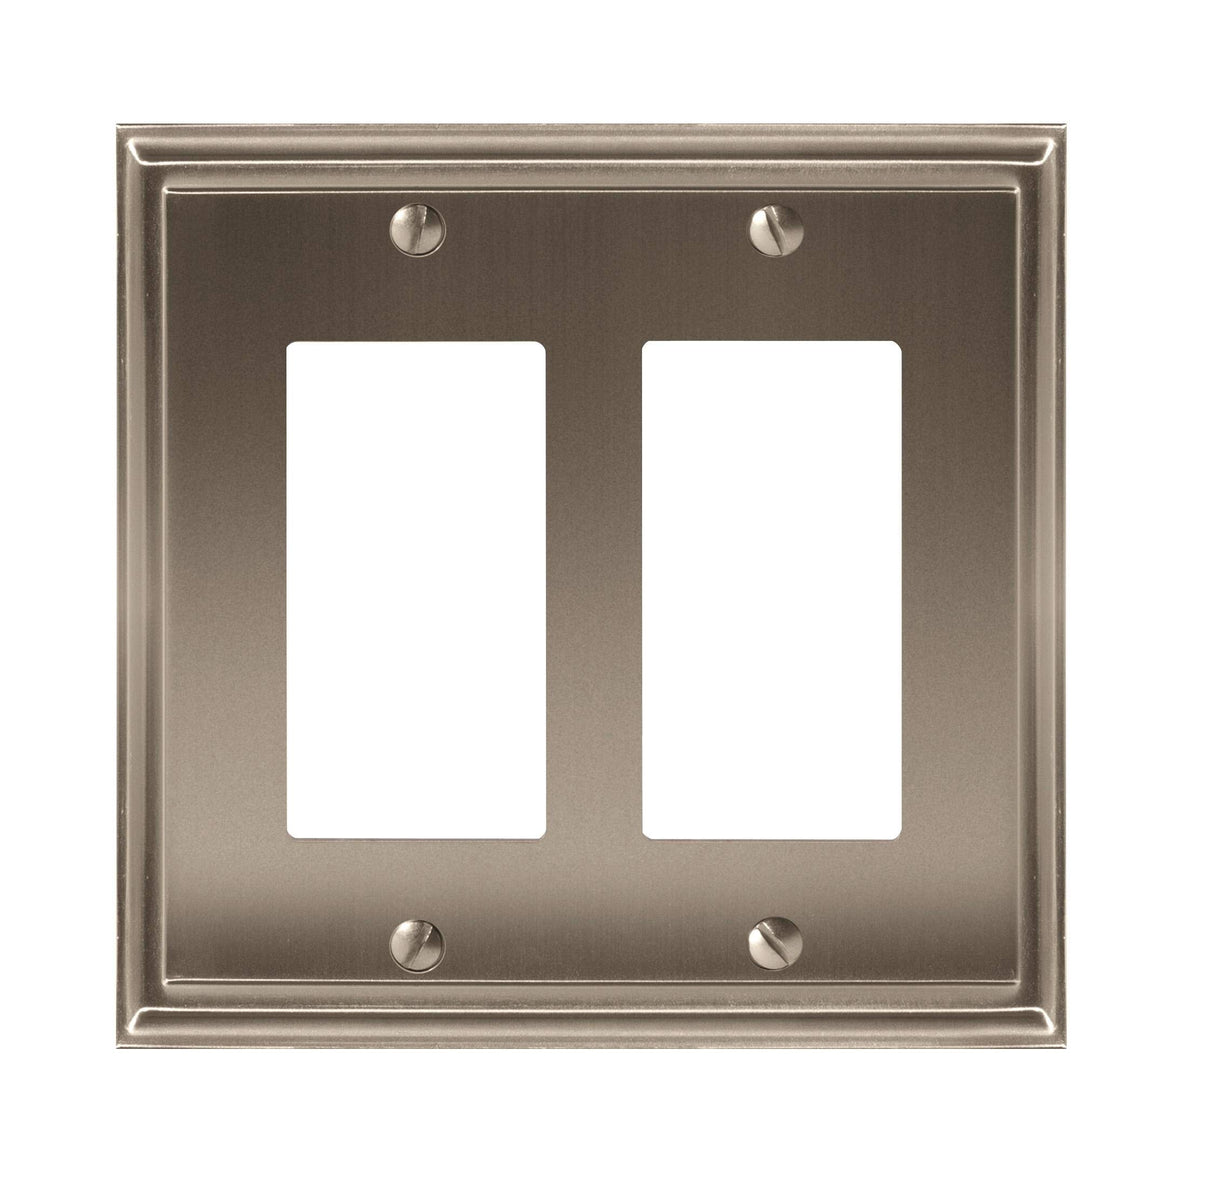 Amerock Wall Plate Satin Nickel 2 Rocker Switch Plate Cover Mulholland 1 Pack Decora Wall Plate Light Switch Cover